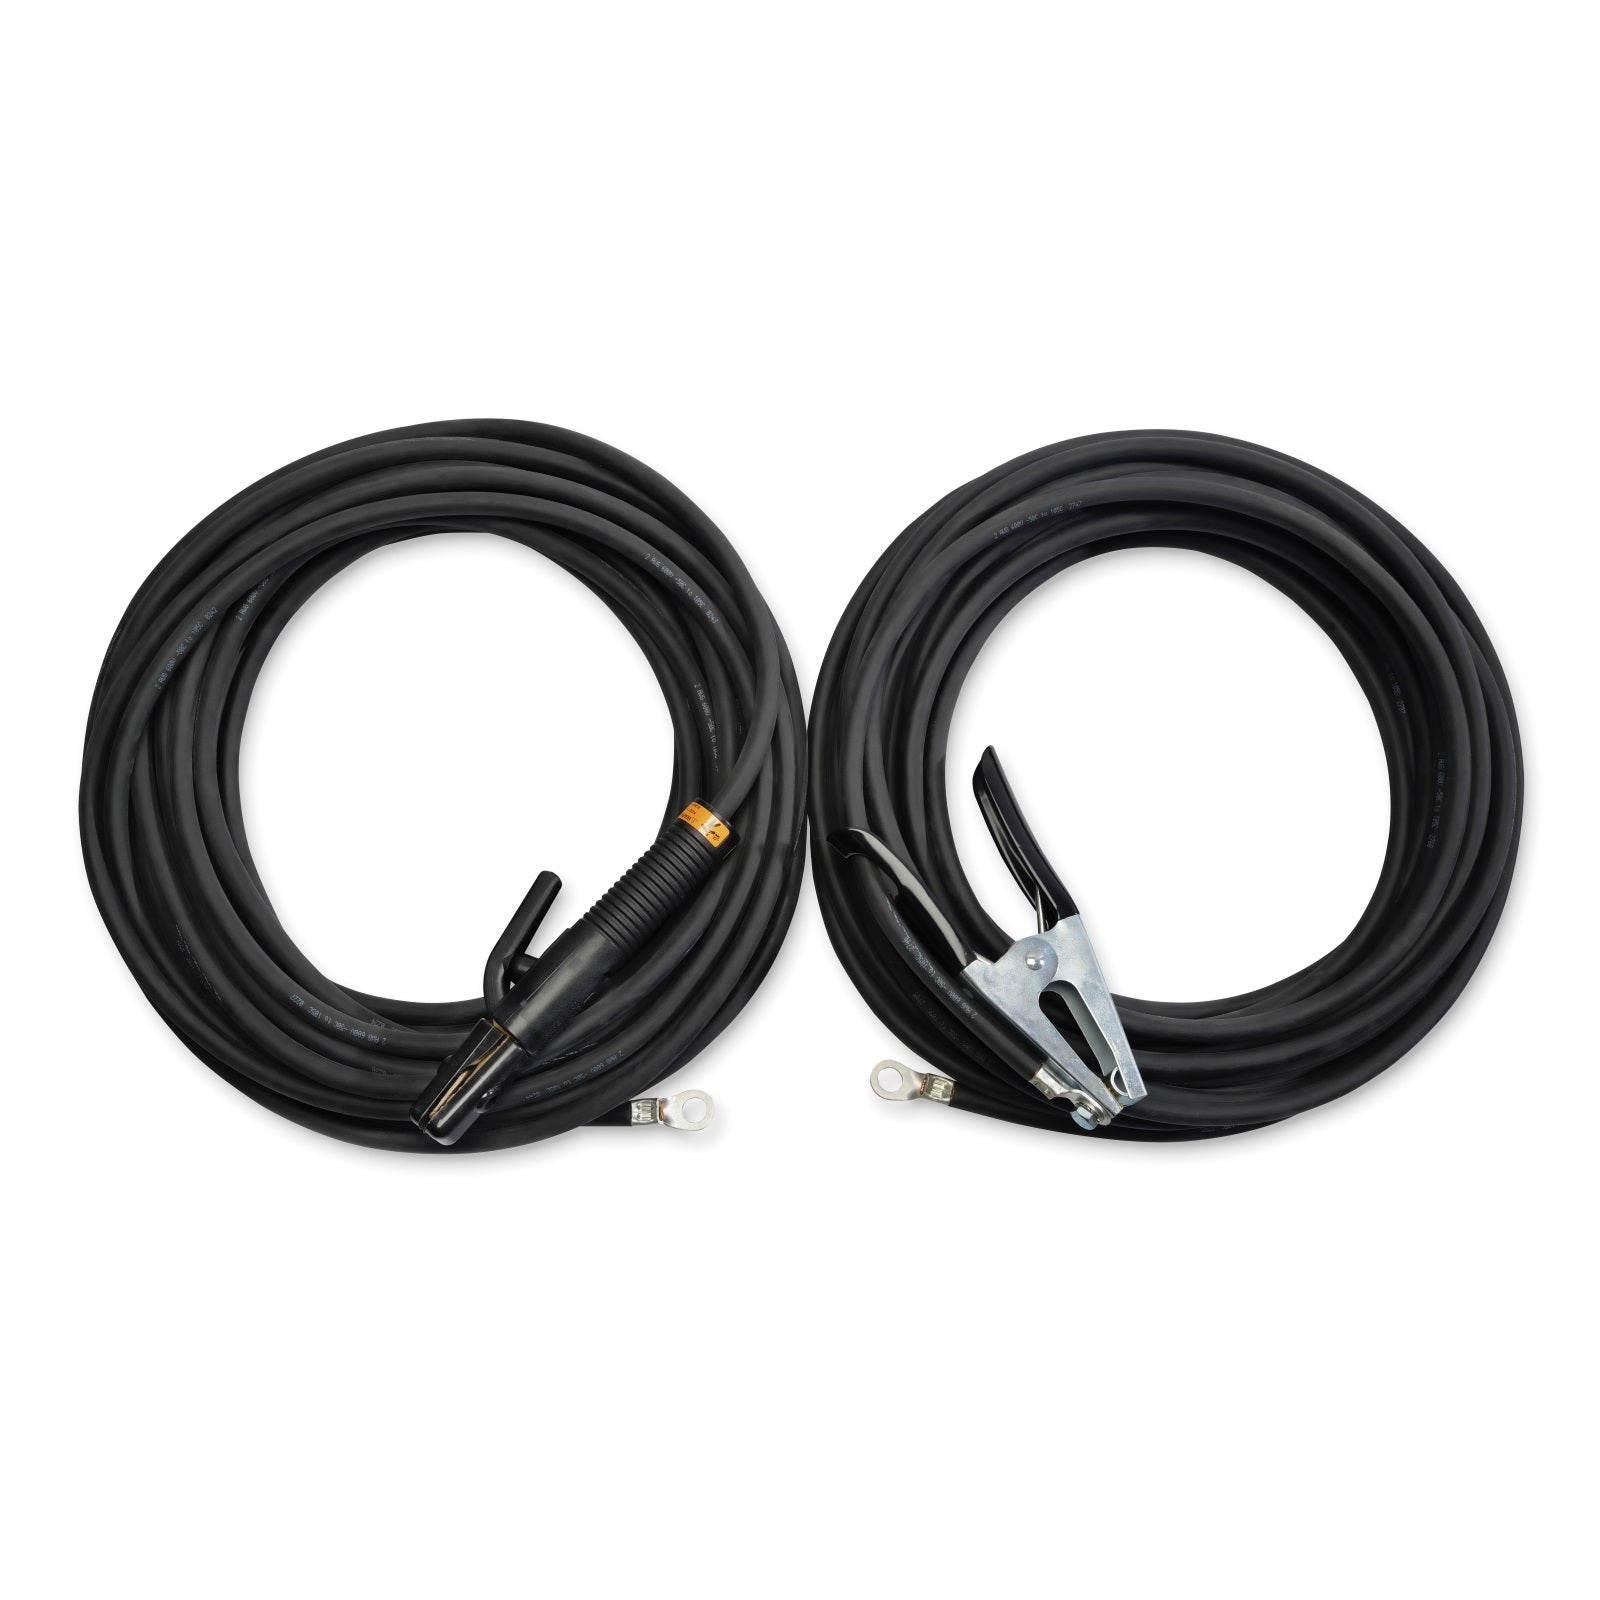 Miller 15' Leads No. 2 Stick Cable Set (195196)